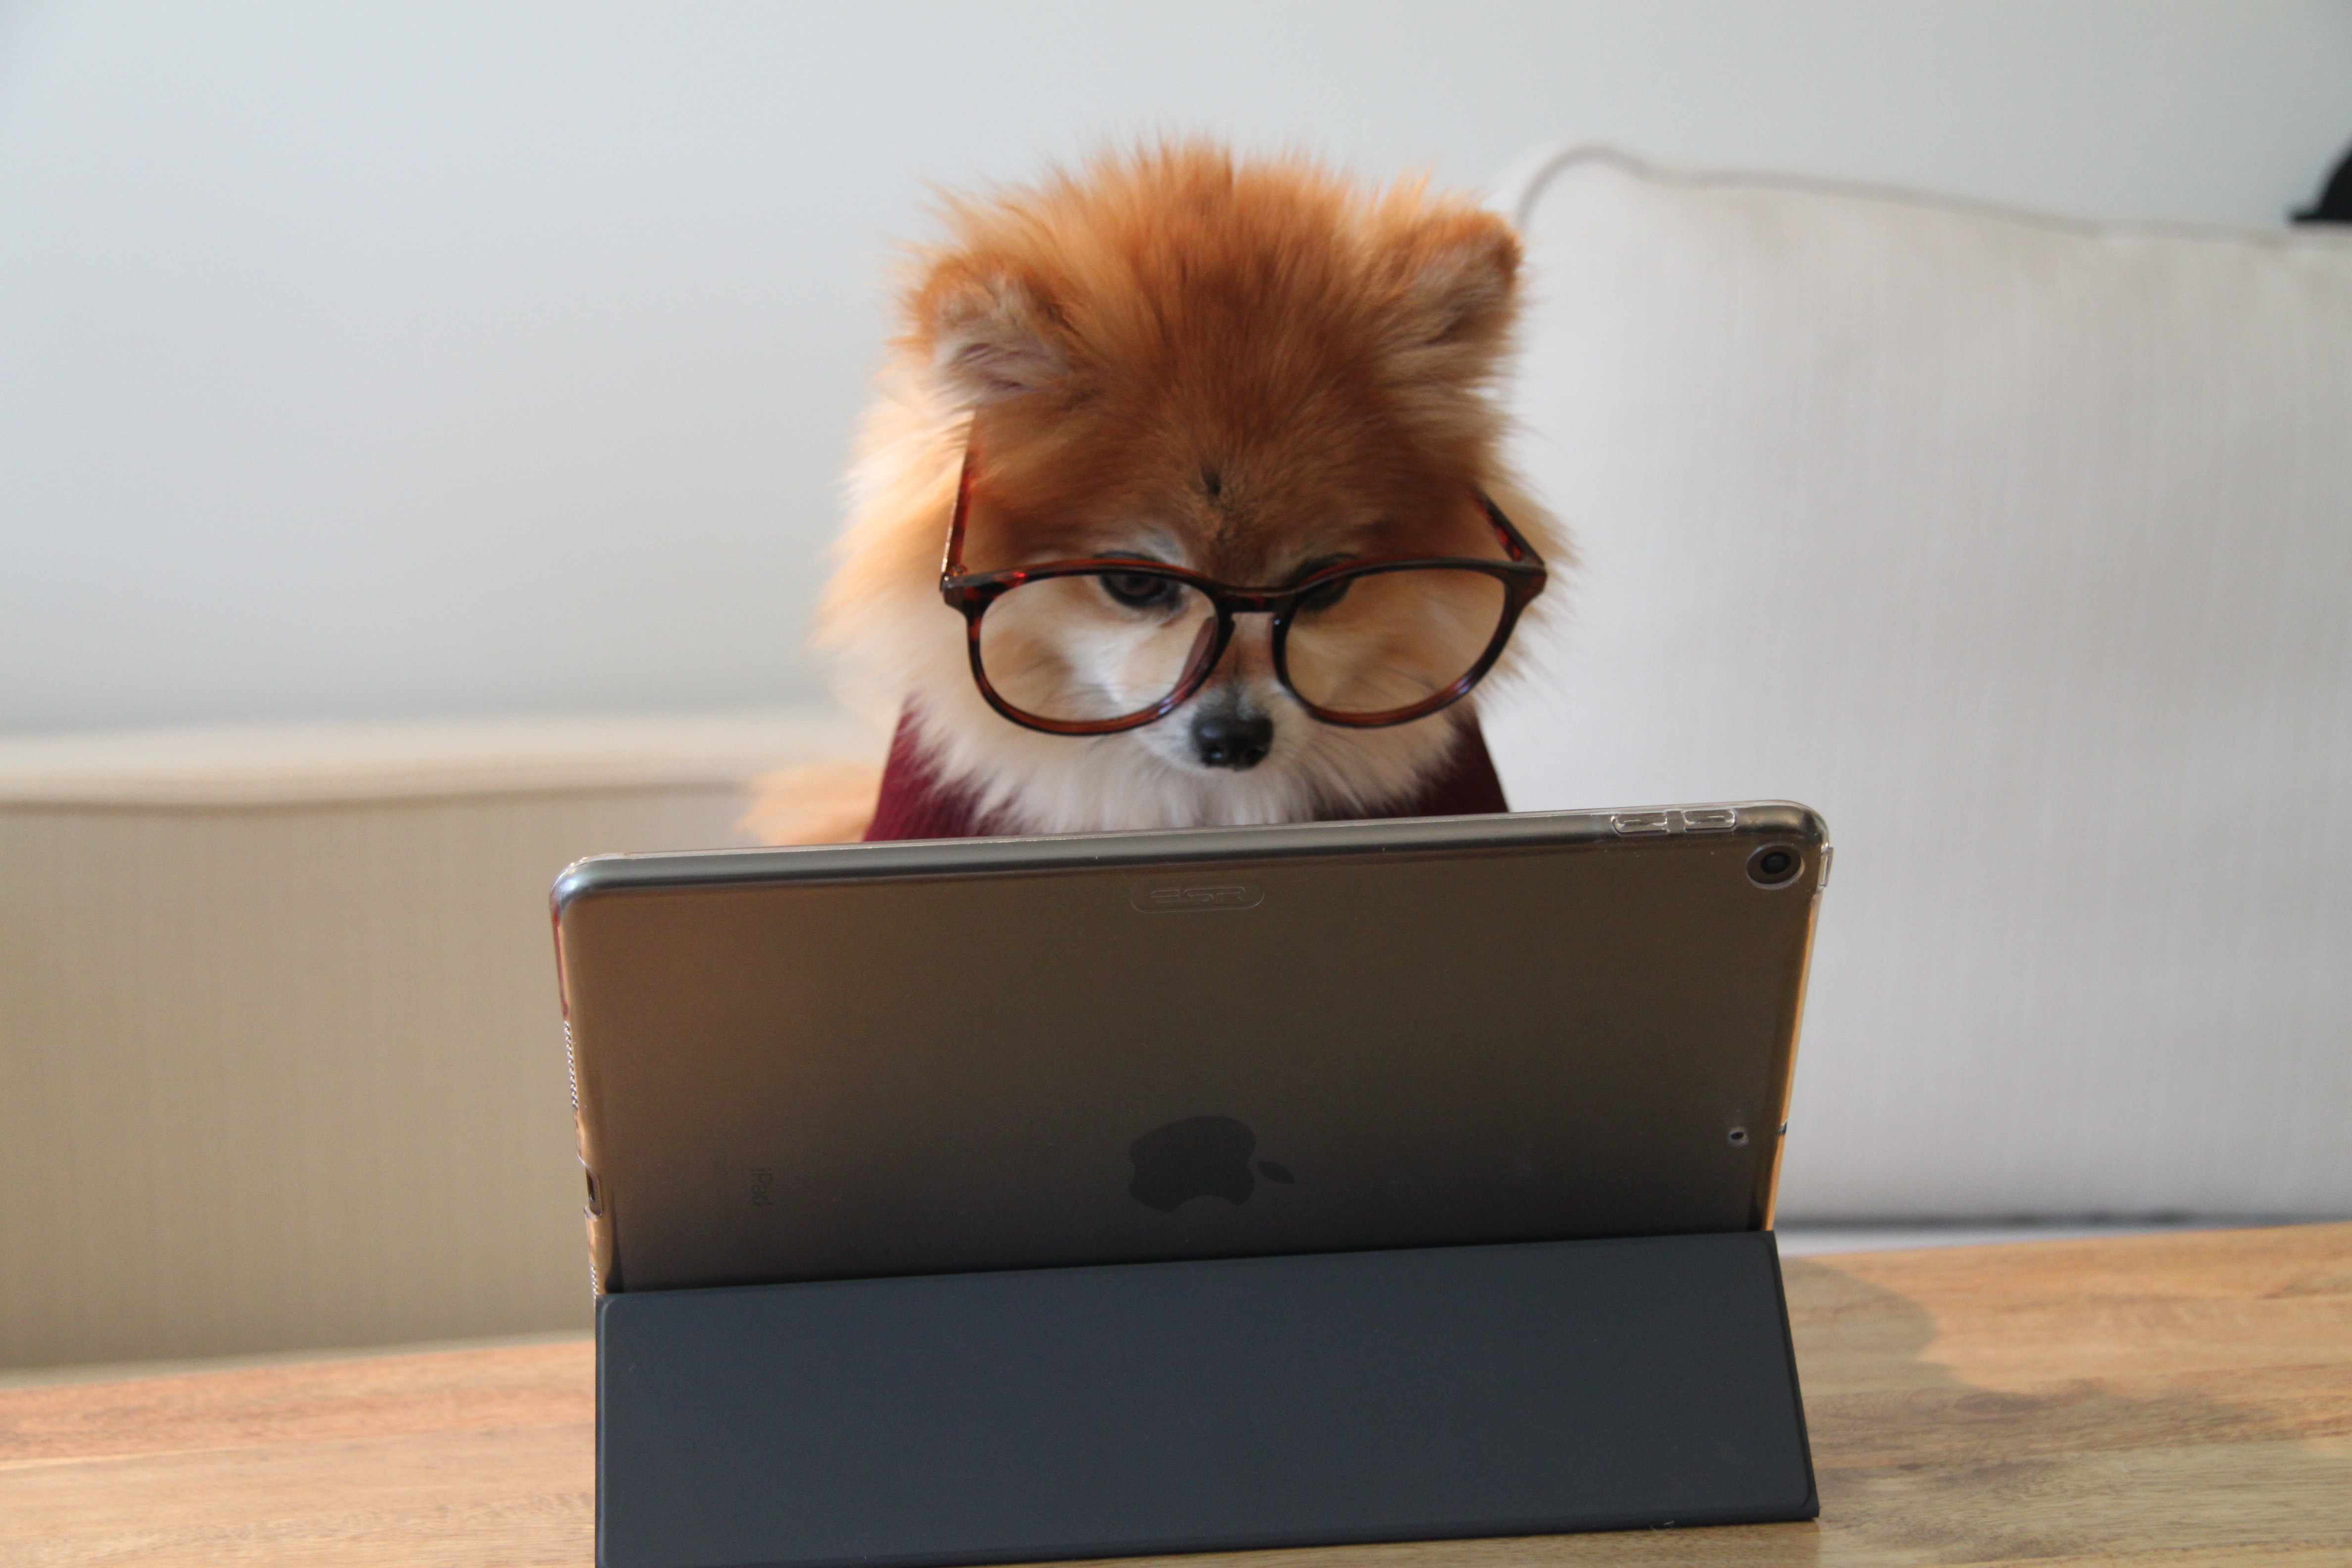 Pomeranian dog wearing glasses while looking at an iPad.